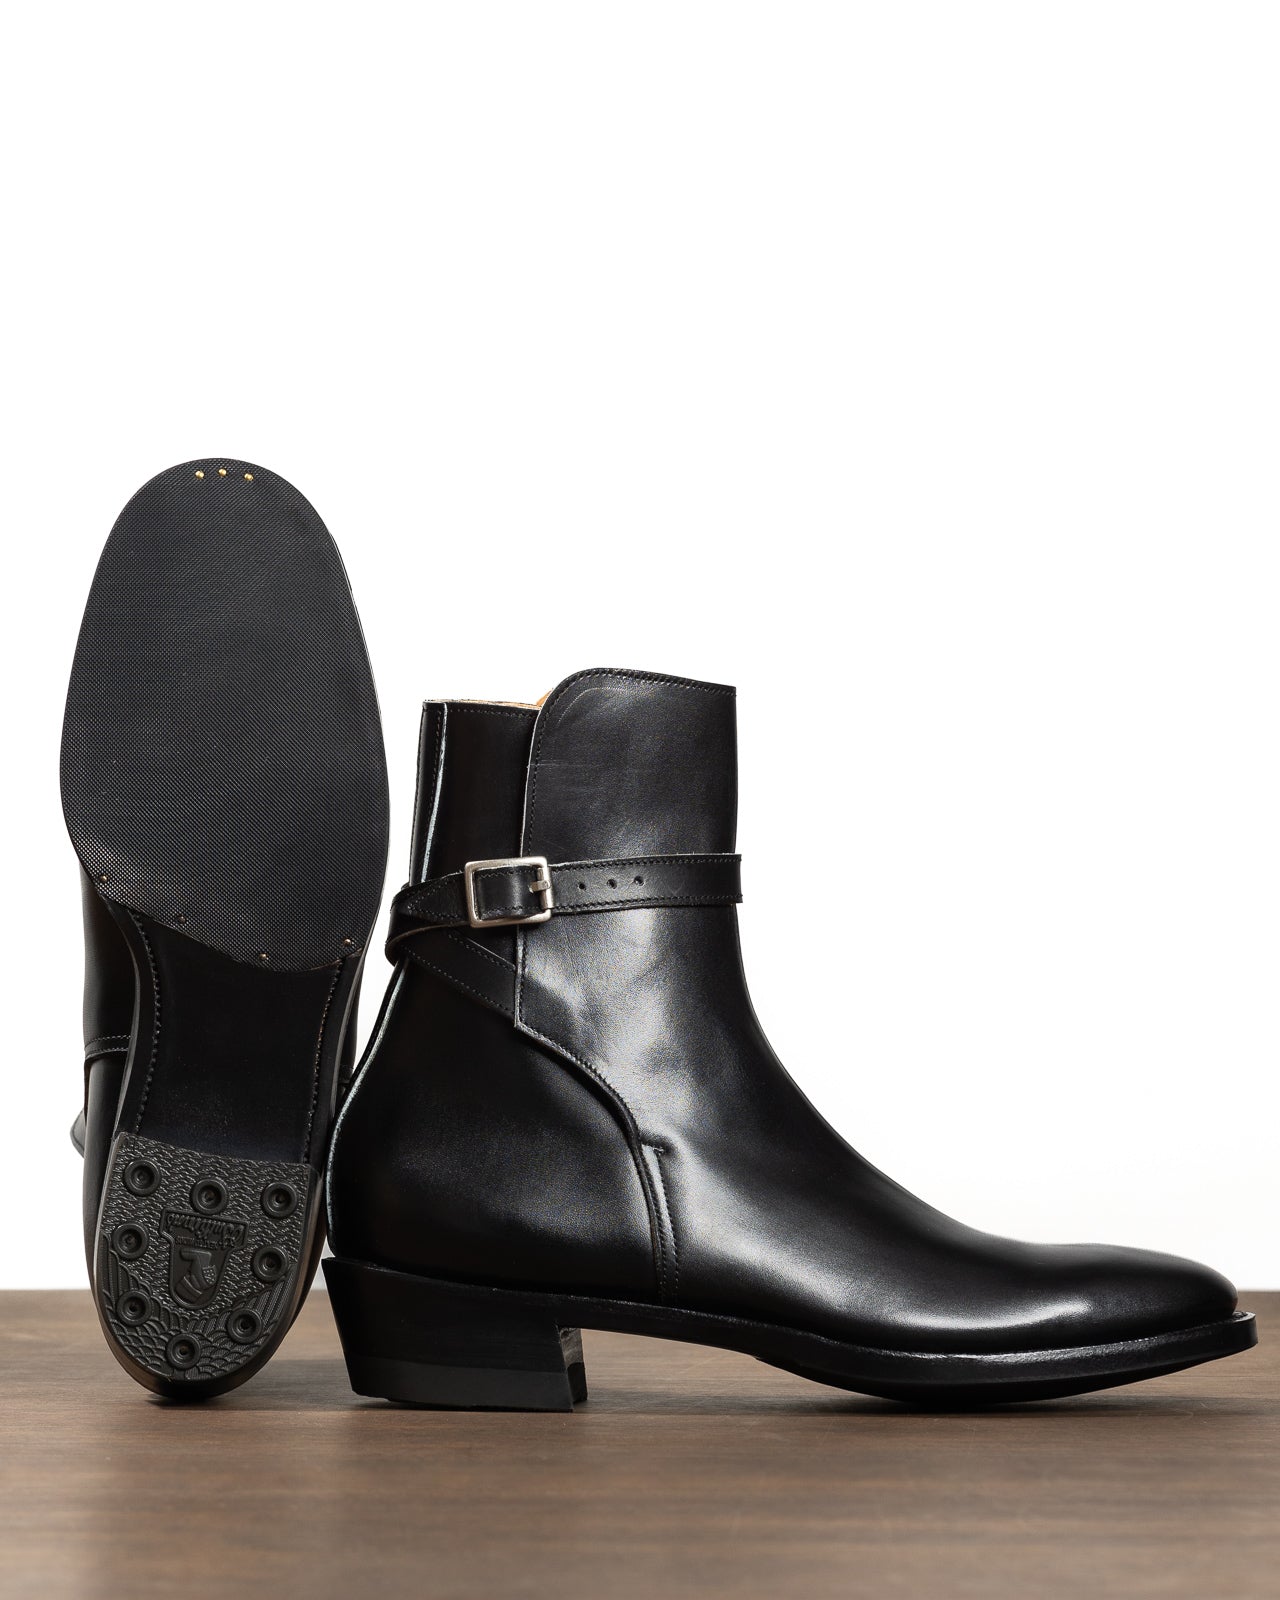 Black Jodhpur Boots for Men High Ankle Leather Boots